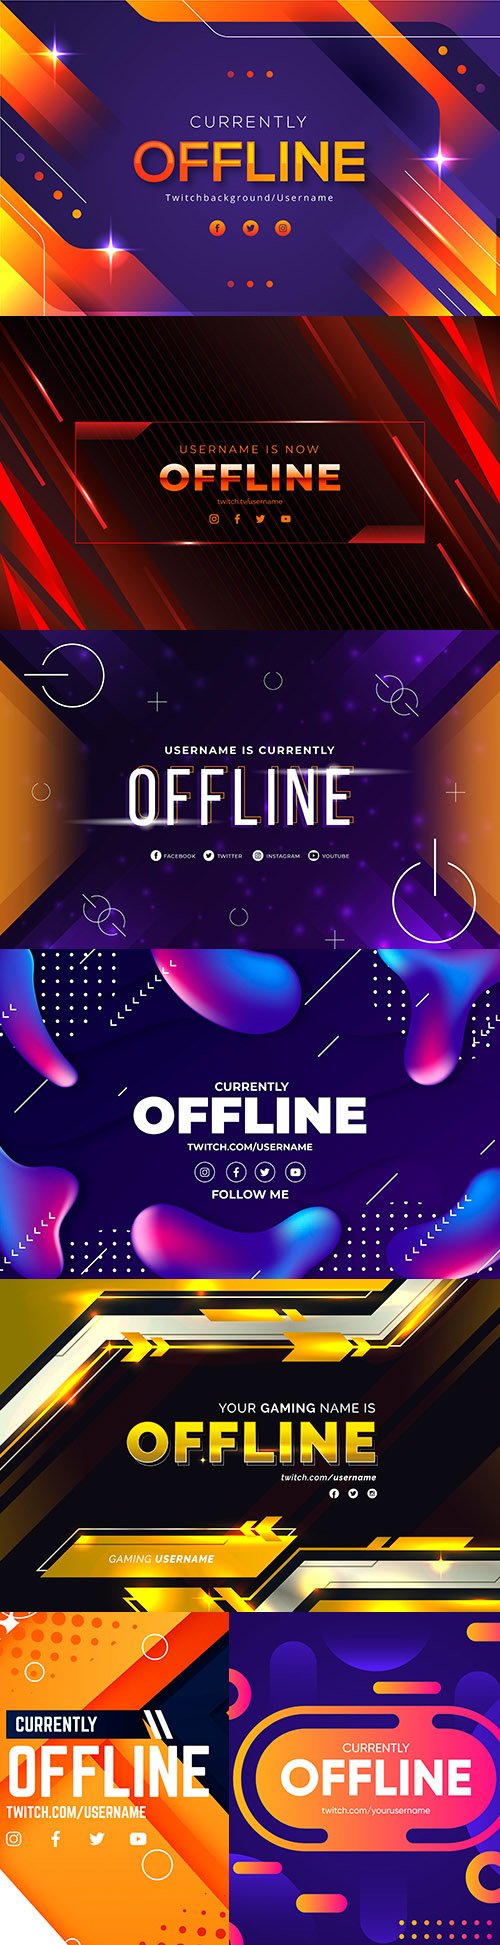 Offline banner abstract design in different styles